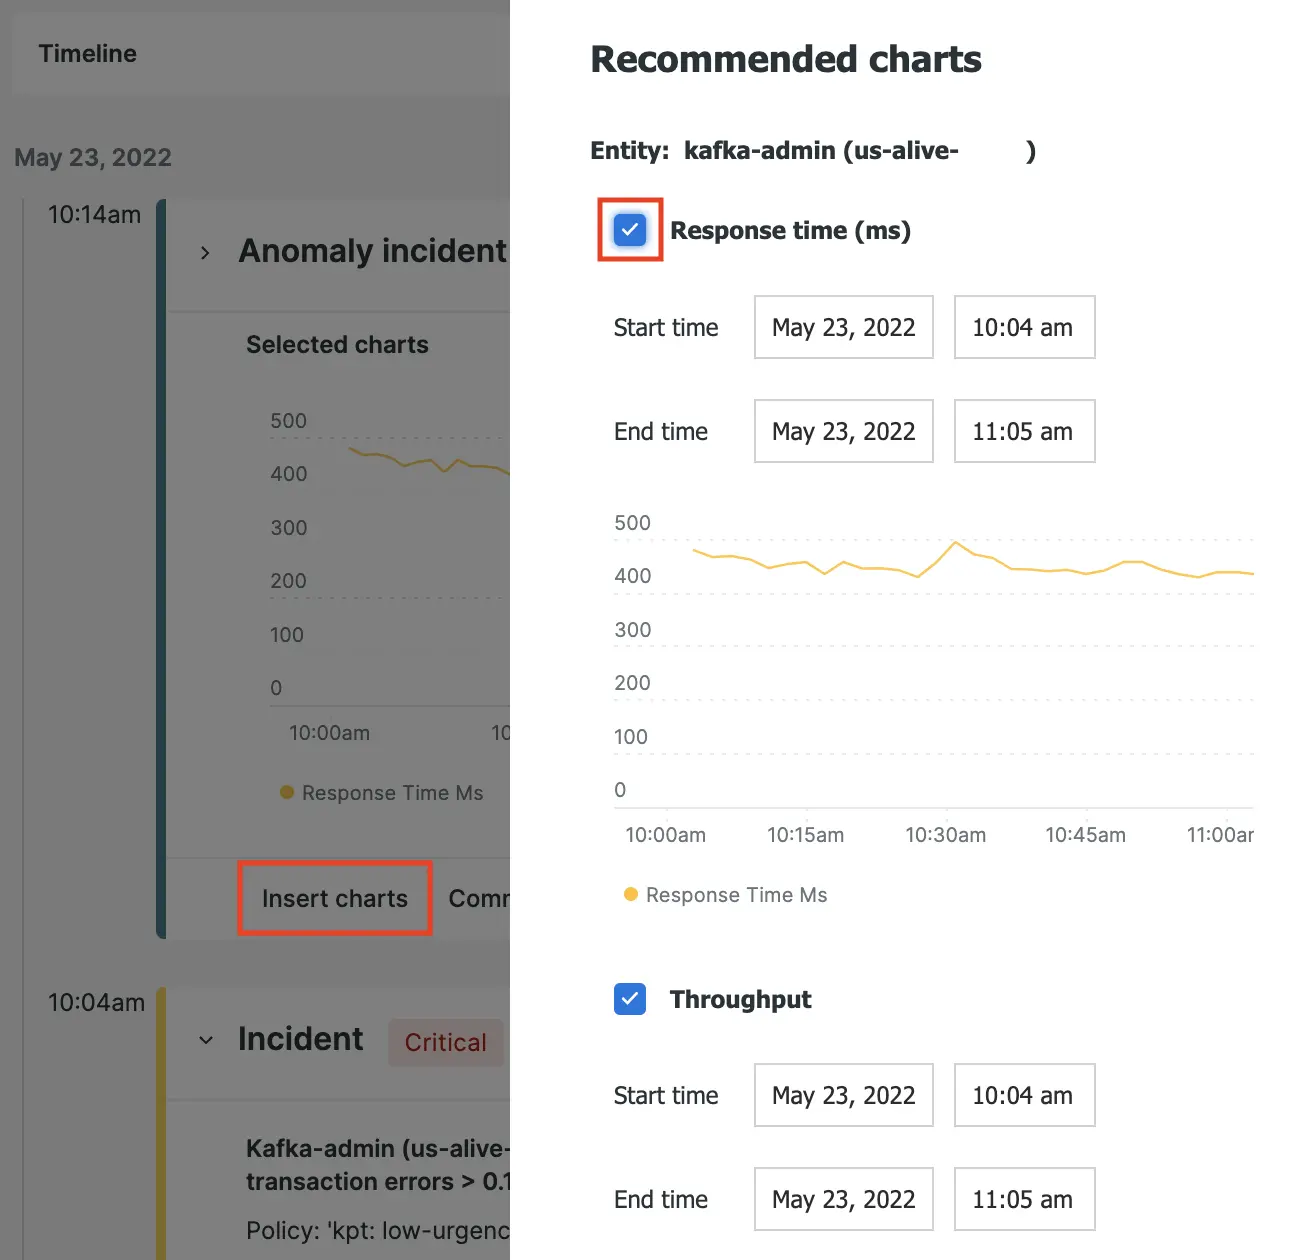 A screenshot of recommended charts for a specific postmortem event.